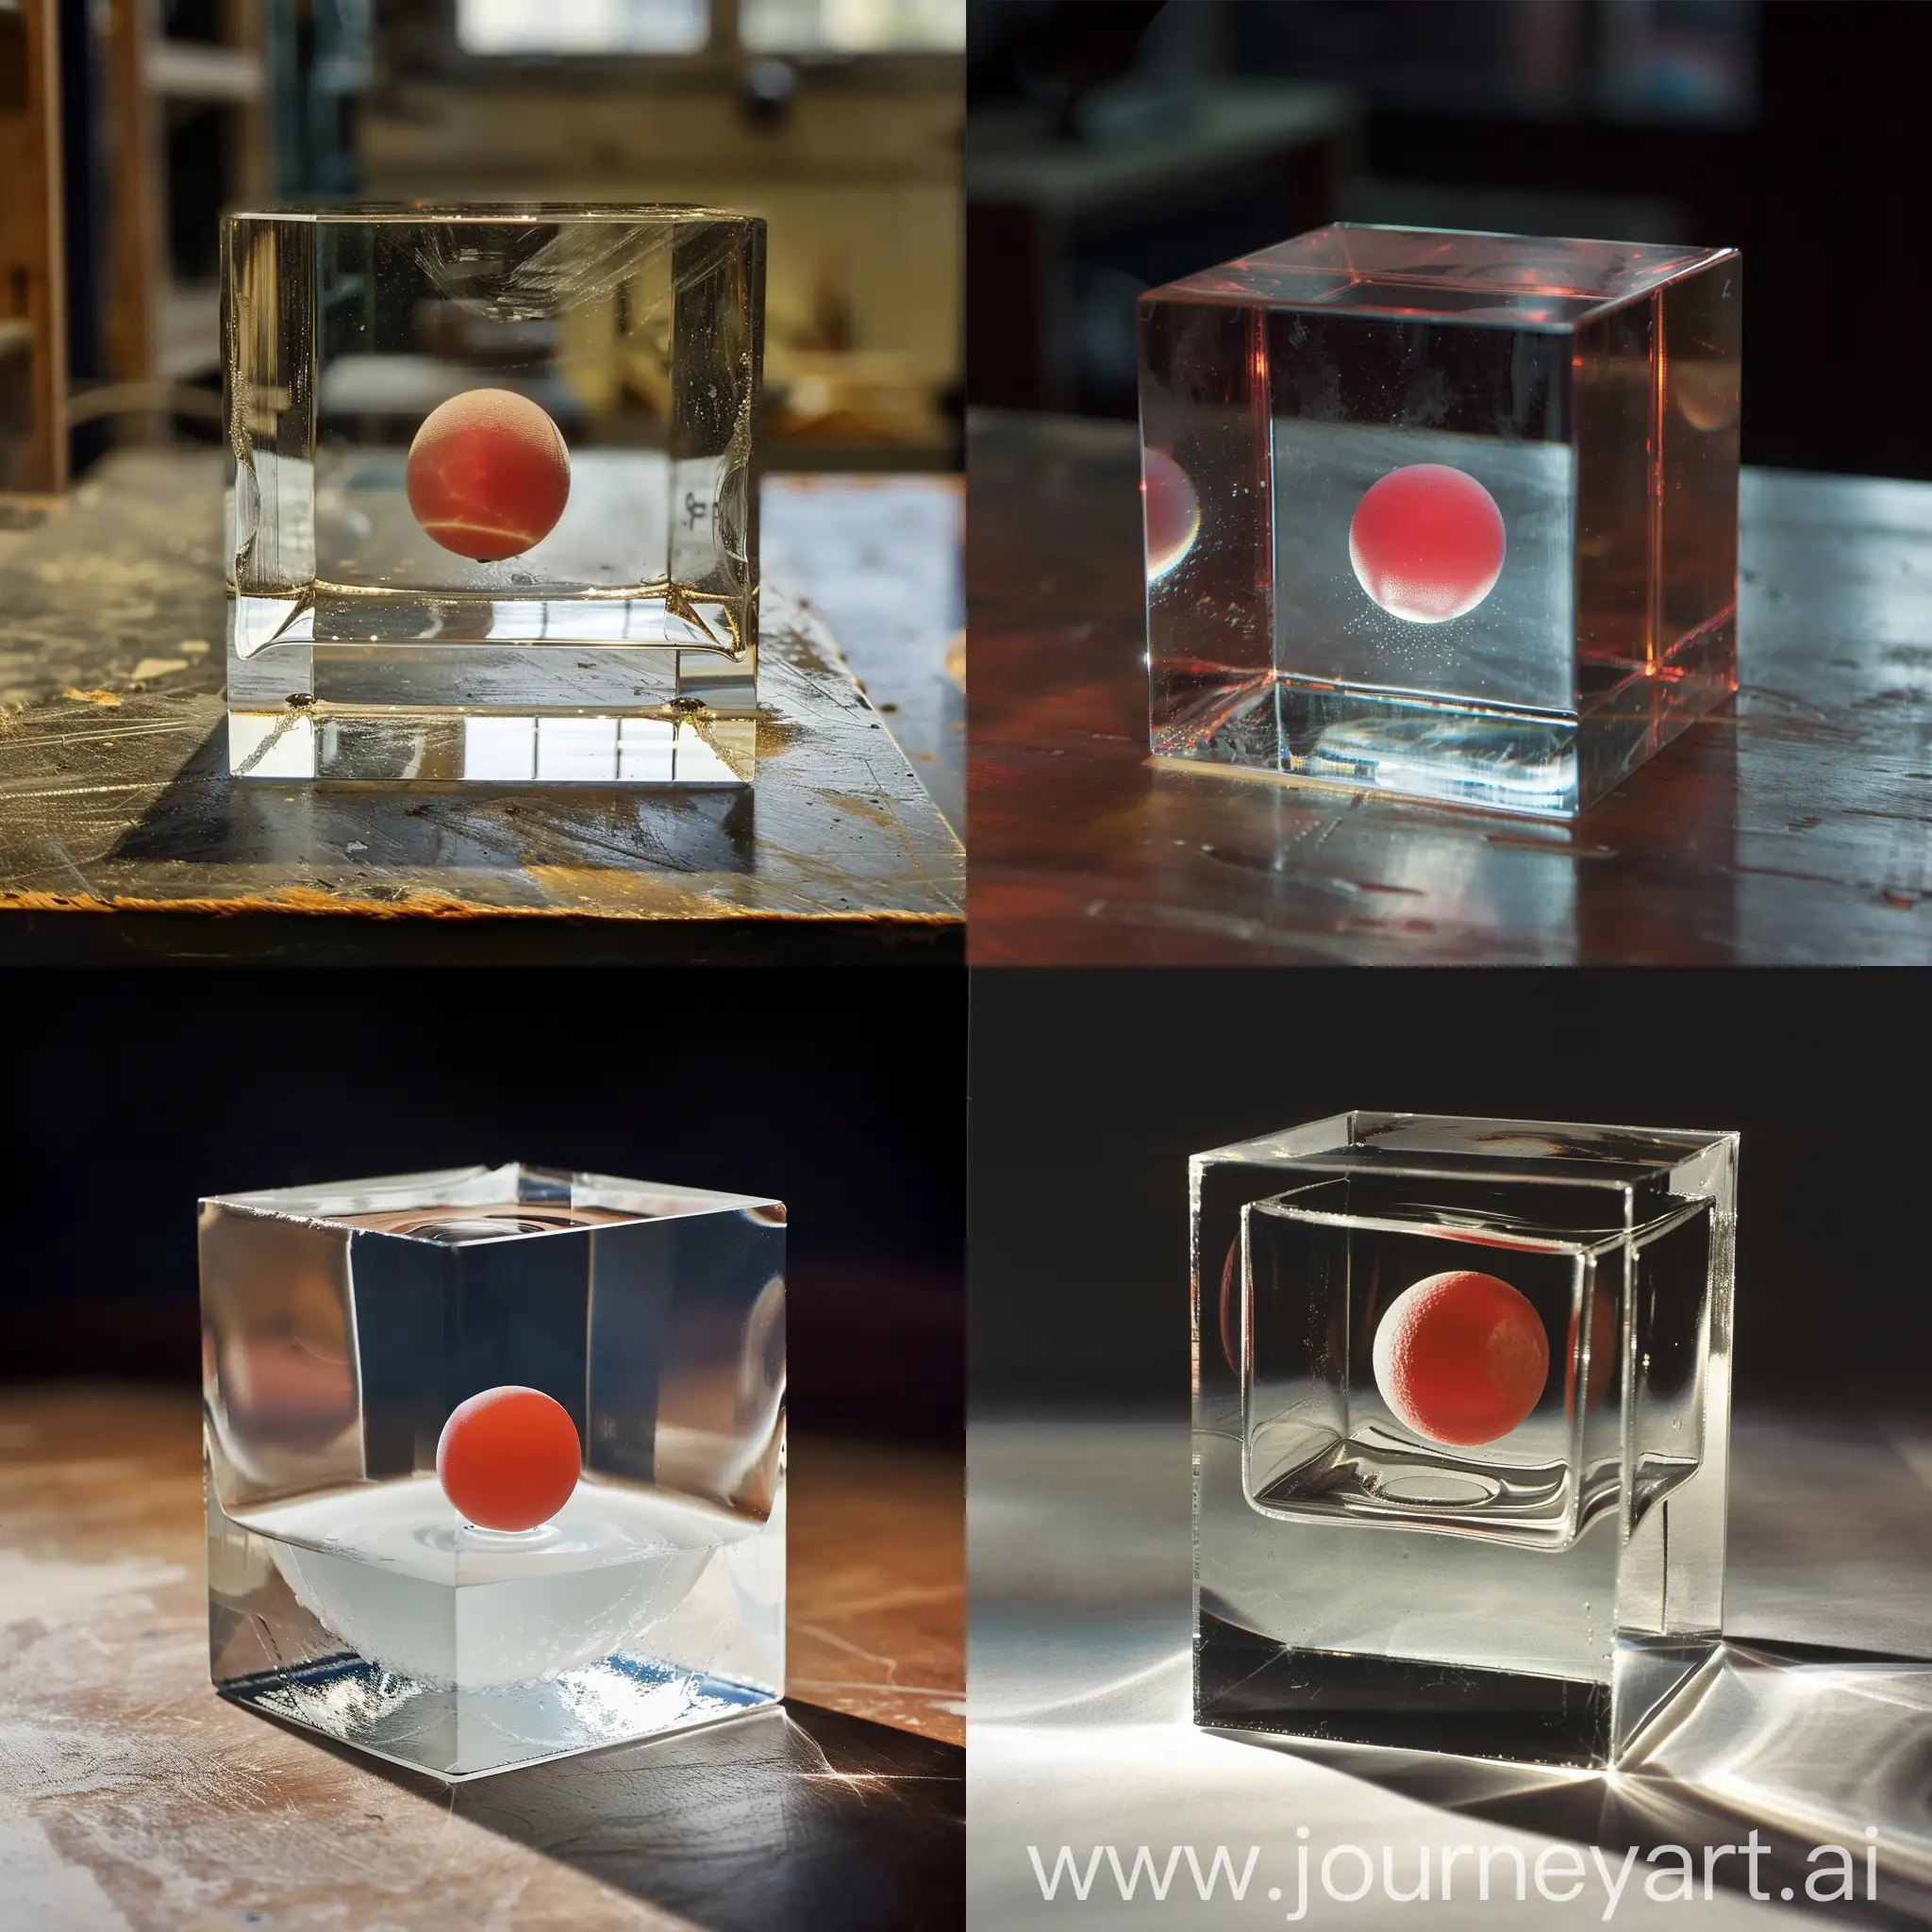 Transparent-Cube-Experiment-with-Ping-Pong-Ball